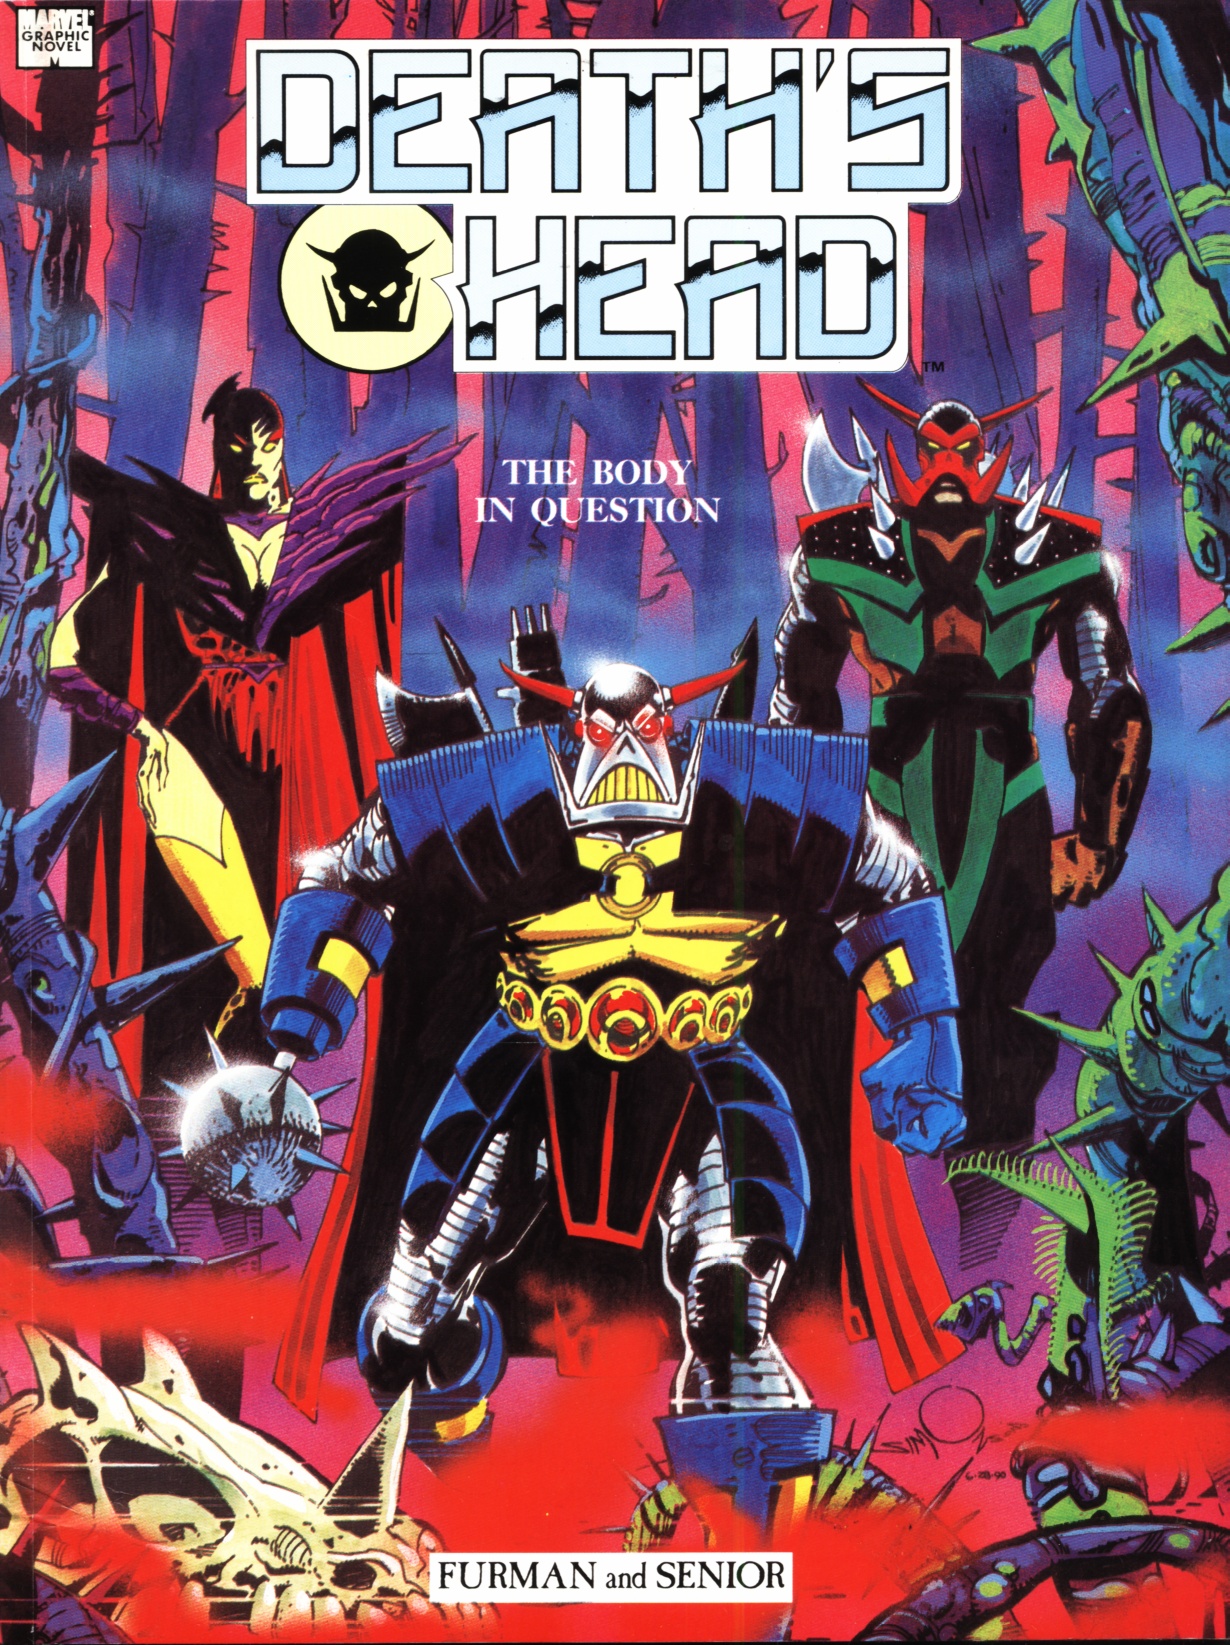 Read online Marvel Graphic Novel comic -  Issue #2 Death's Head - The Body In Question - 1